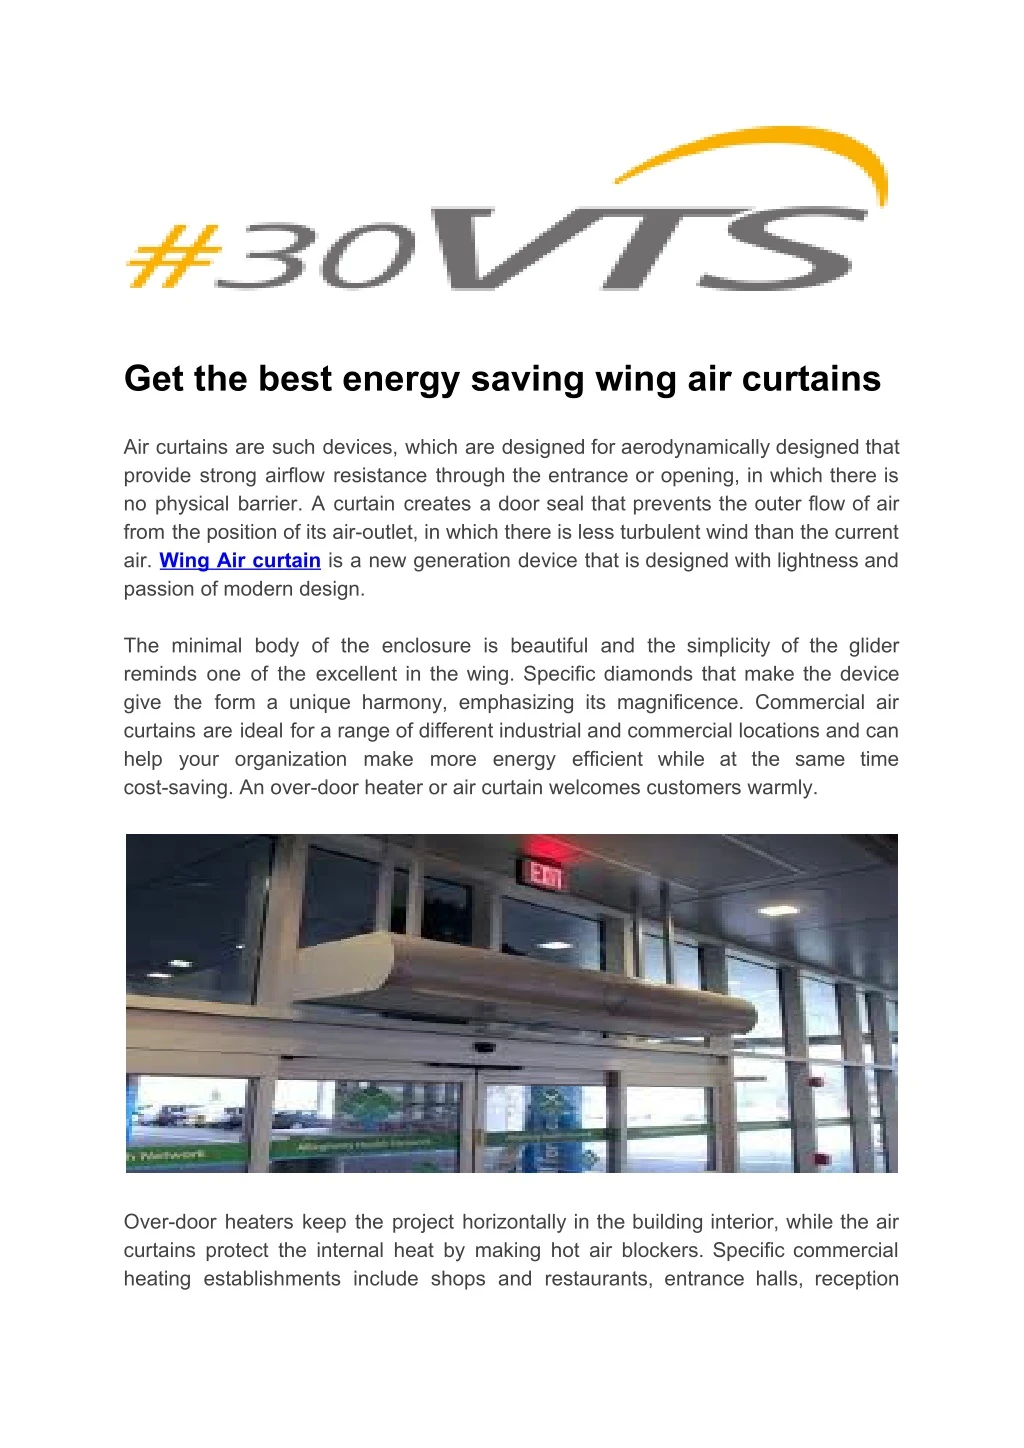 get the best energy saving wing air curtains